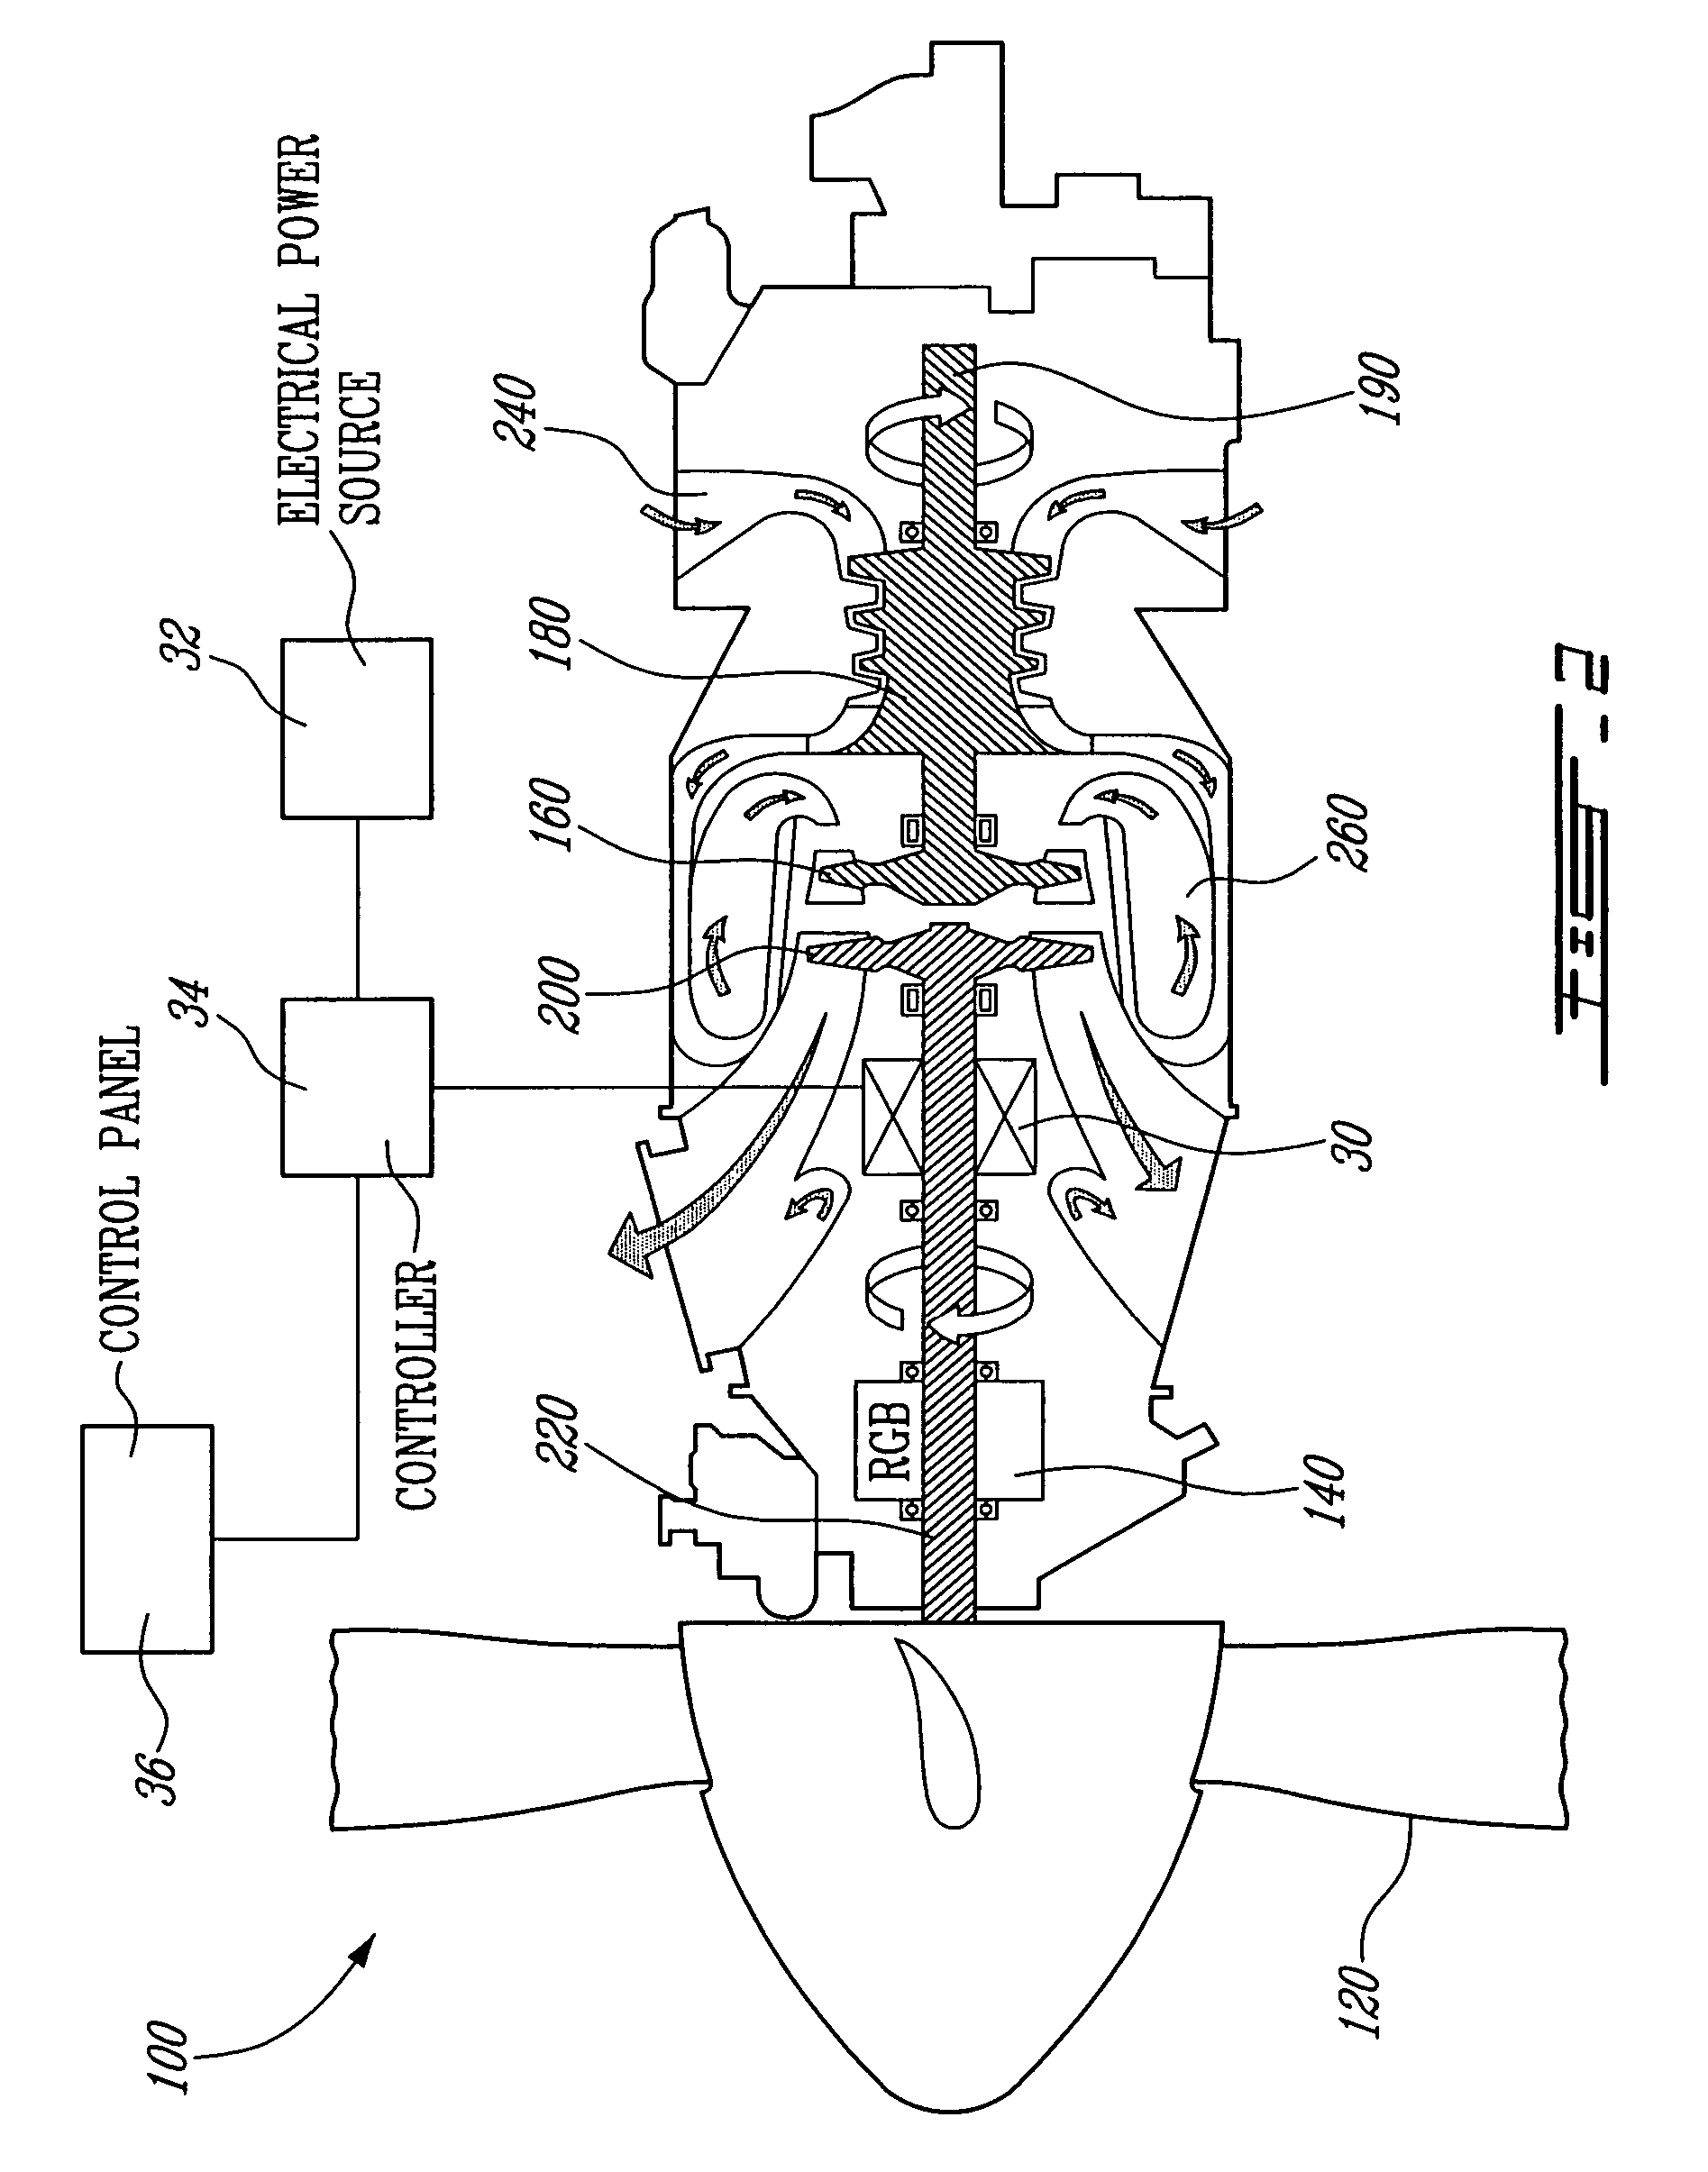 Method and system for taxiing an aircraft